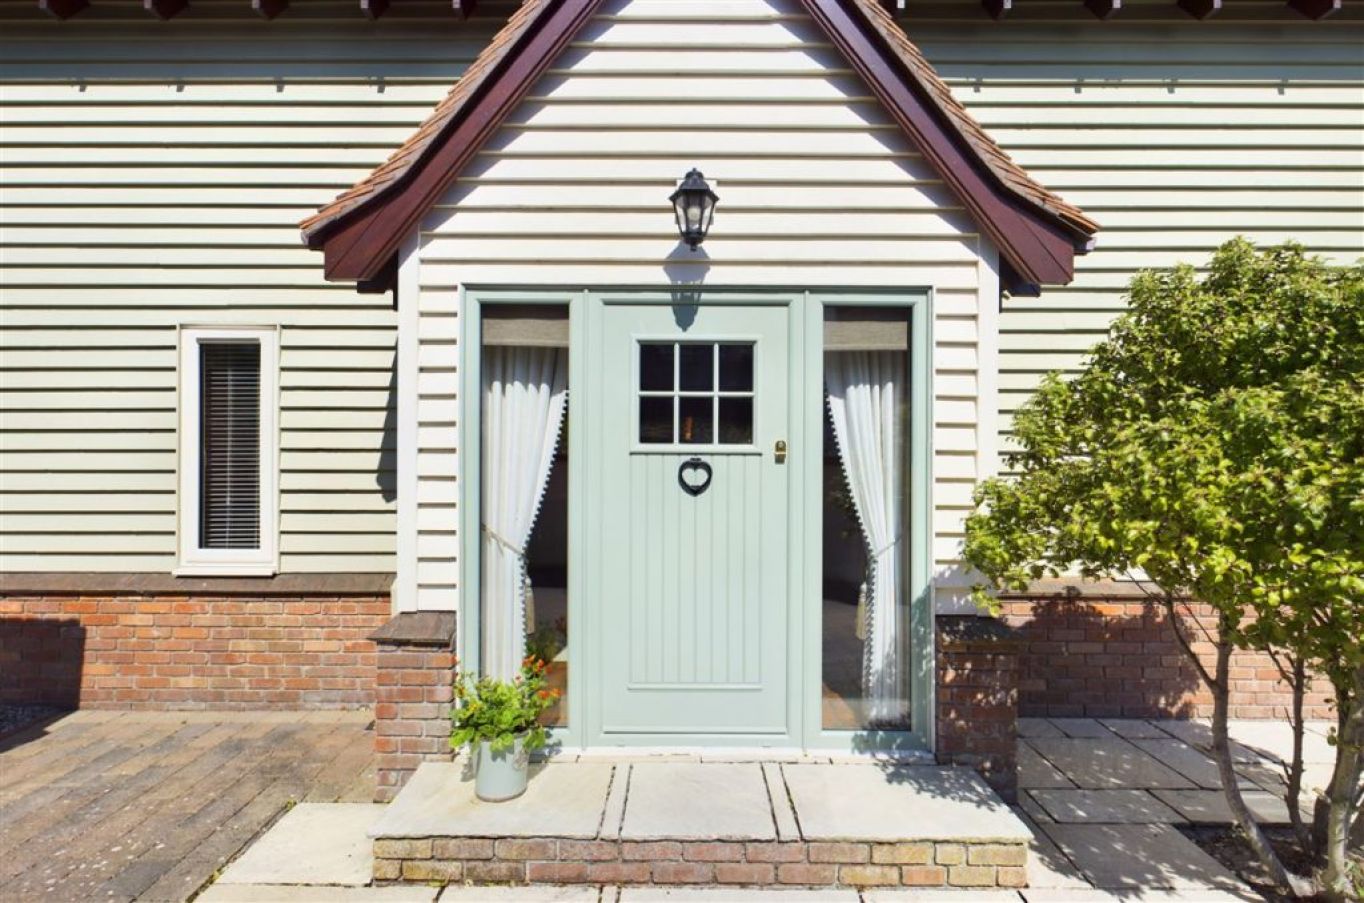 Entry To The House, Built In 2005, Is Through A Cottage-Style Front Porch. Photo: Courtesy Of Re/Max Property Specialists.